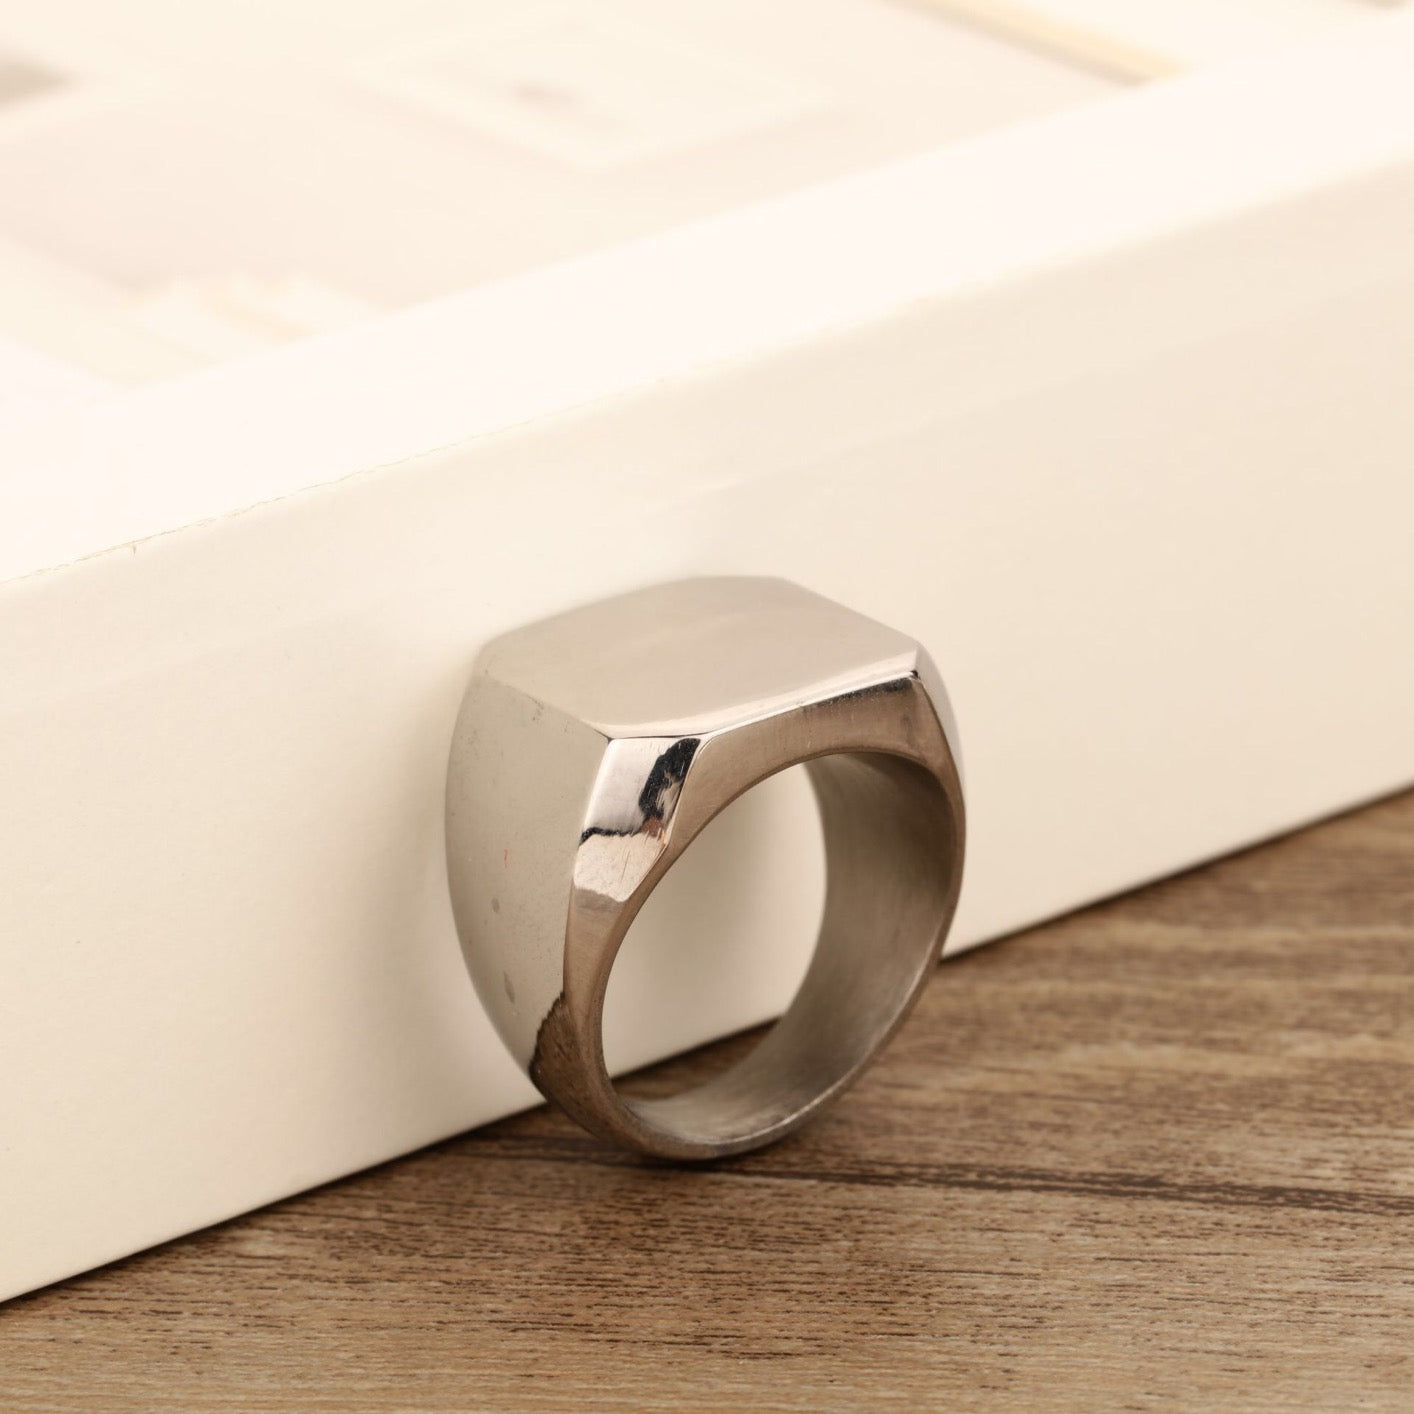 Simple Square Alloy Ring - Streetwear Jewelry in Sizes 8-12 - Jewelry & Watches - Bijou Her -  -  - 